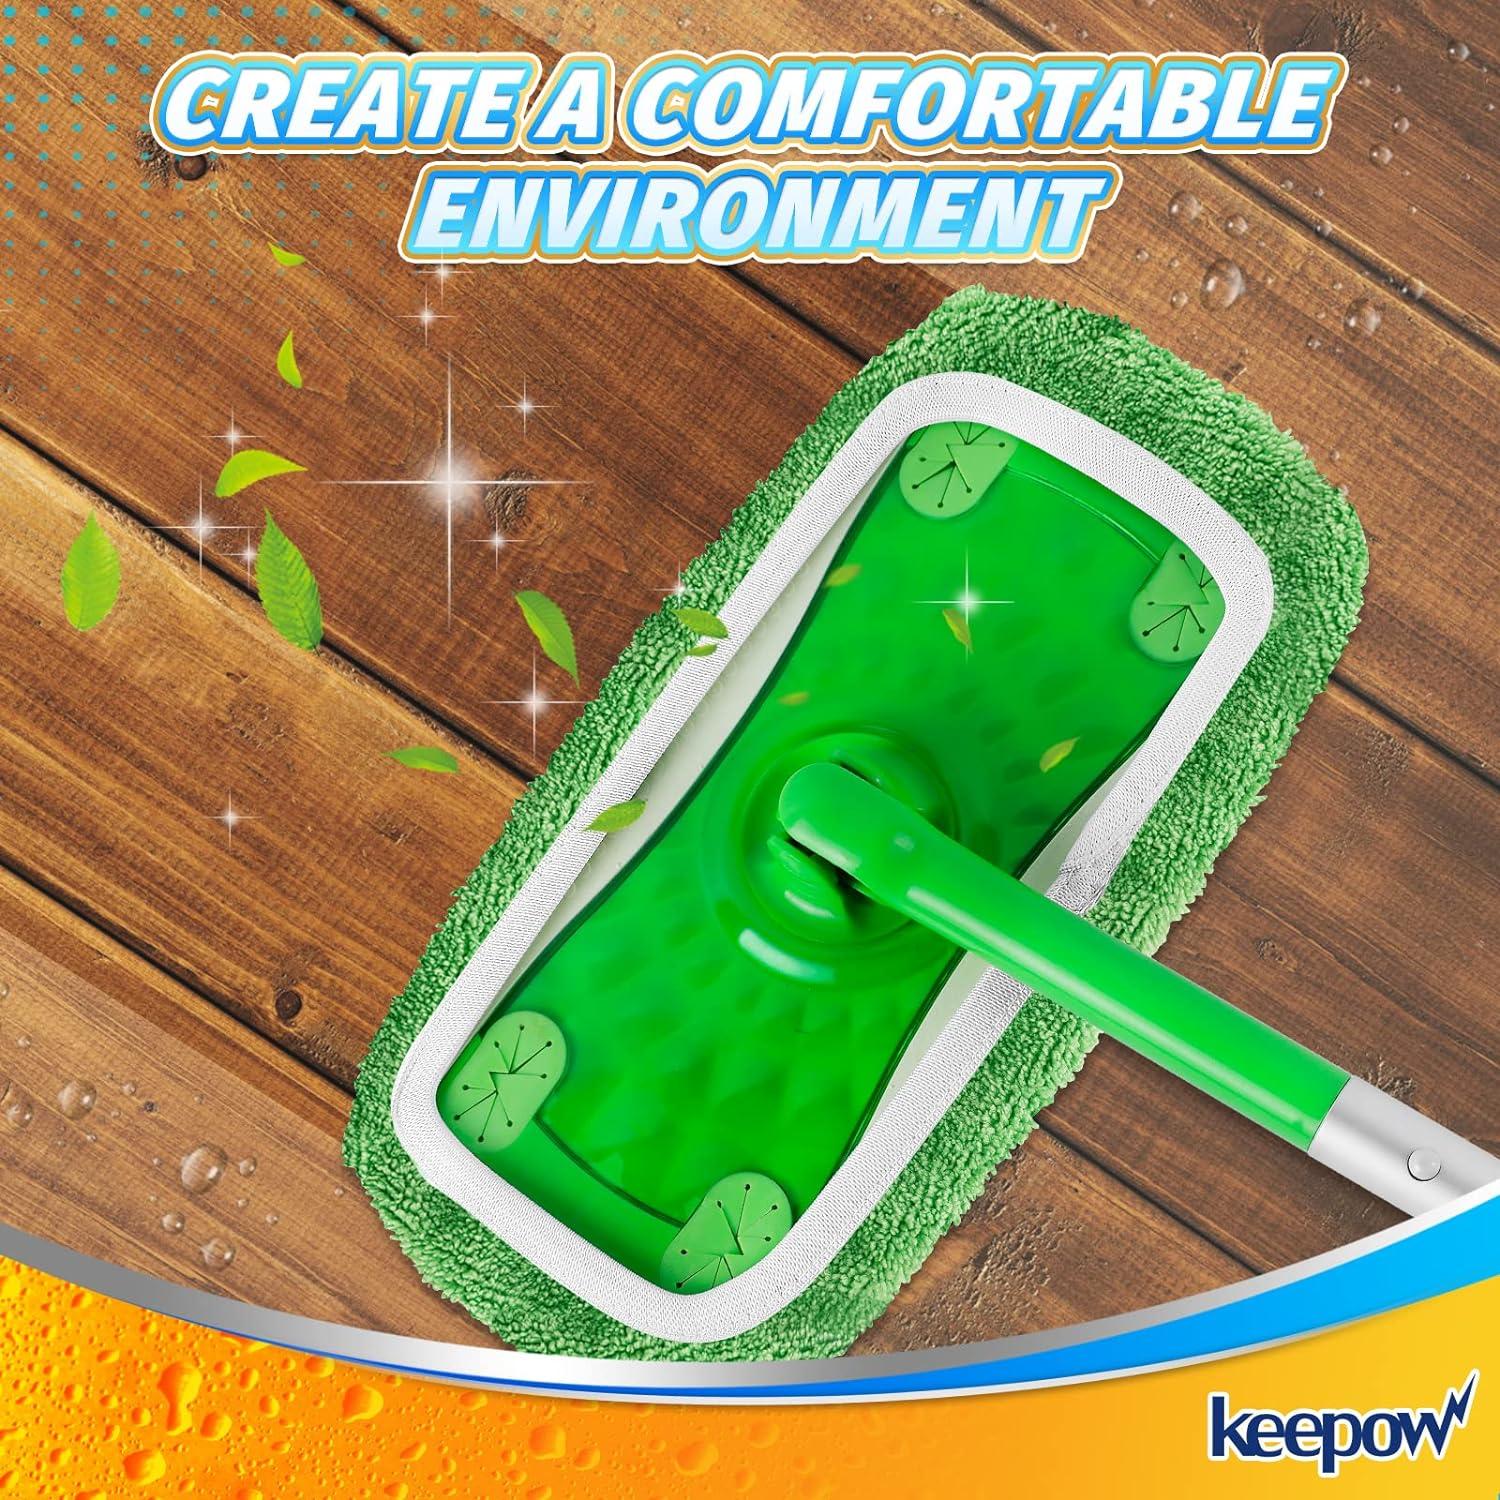 KEEPOW Reusable XL Mop Pads Compatible for Swiffer XL Sweeper, X